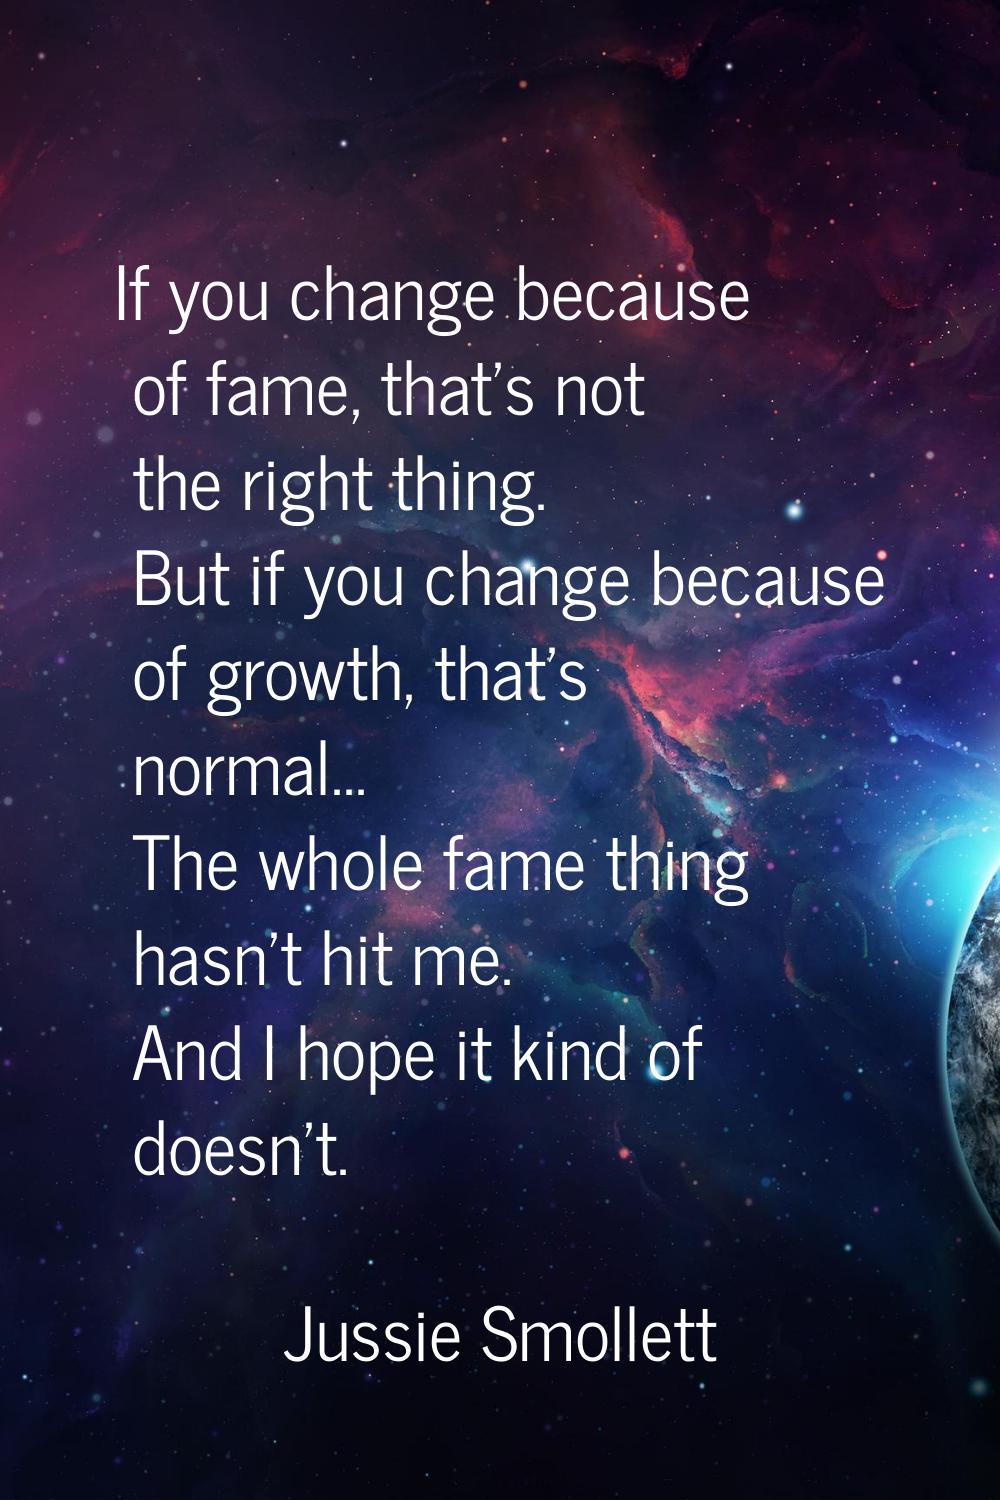 If you change because of fame, that's not the right thing. But if you change because of growth, tha